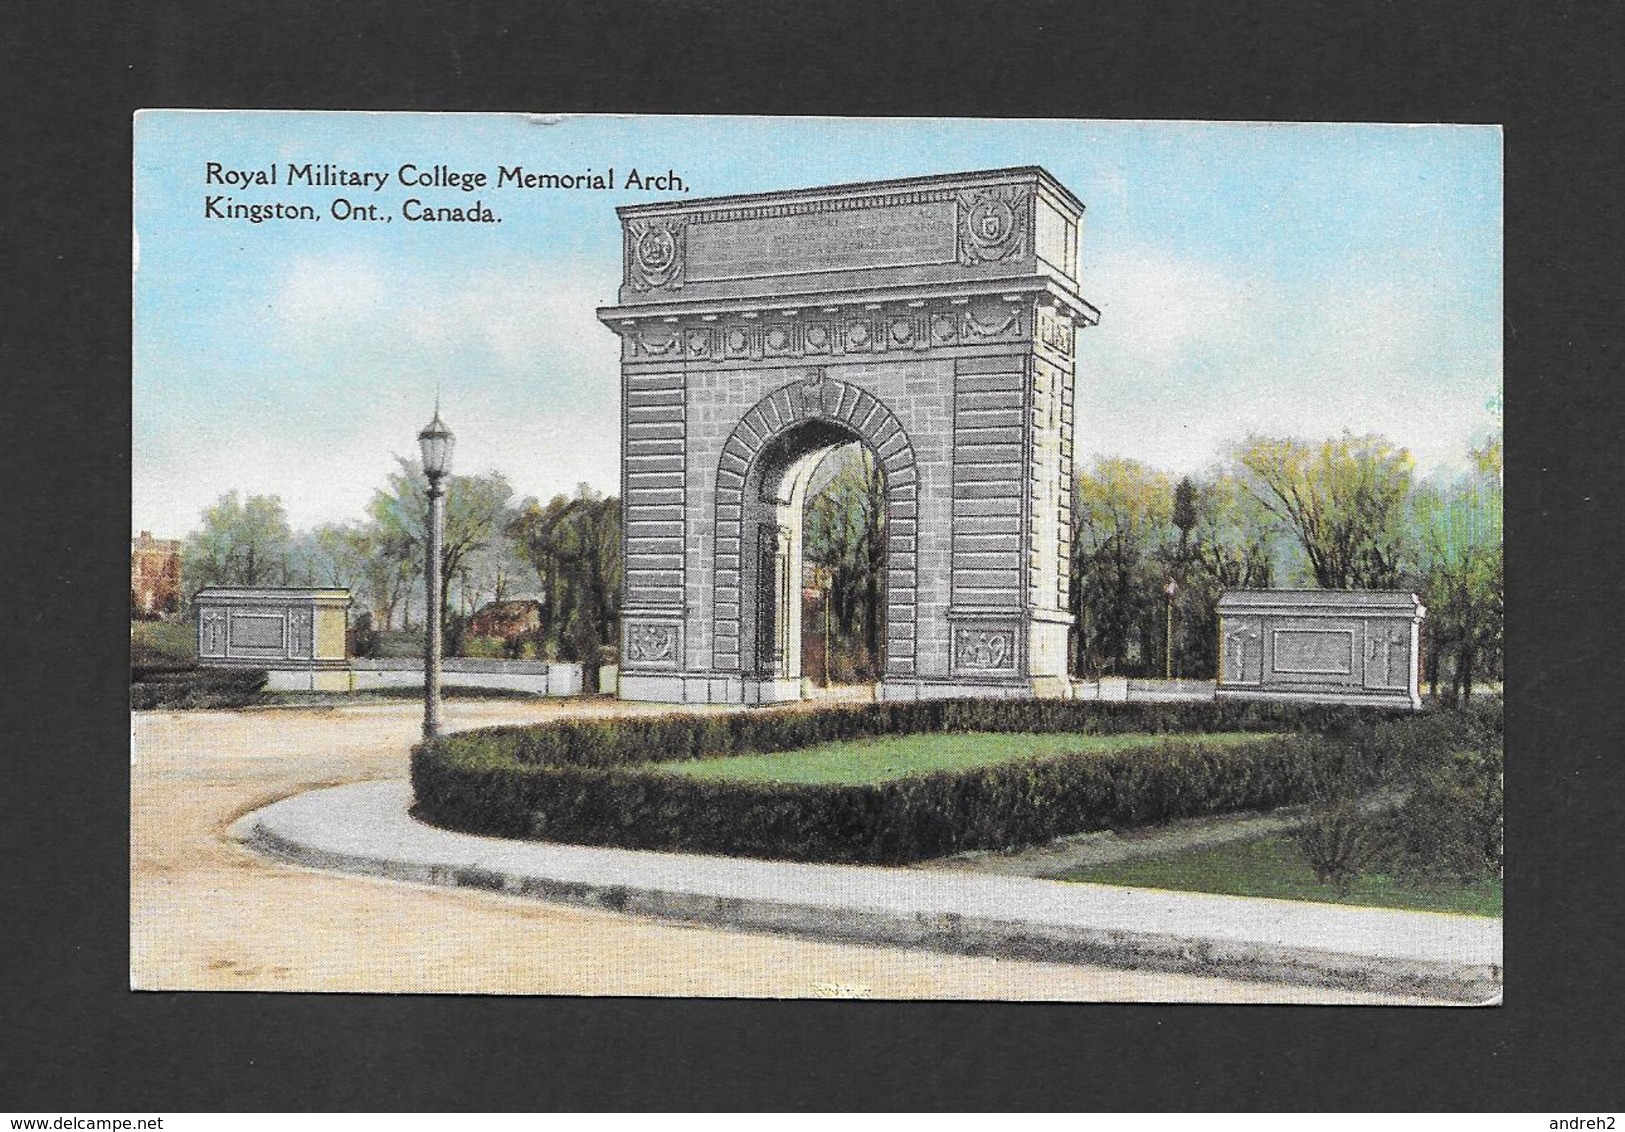 KINGSTON - ONTARIO - ROYAL MILITARY COLLEGE MEMORIAL ARCH - BY CANADA SERIES - Kingston